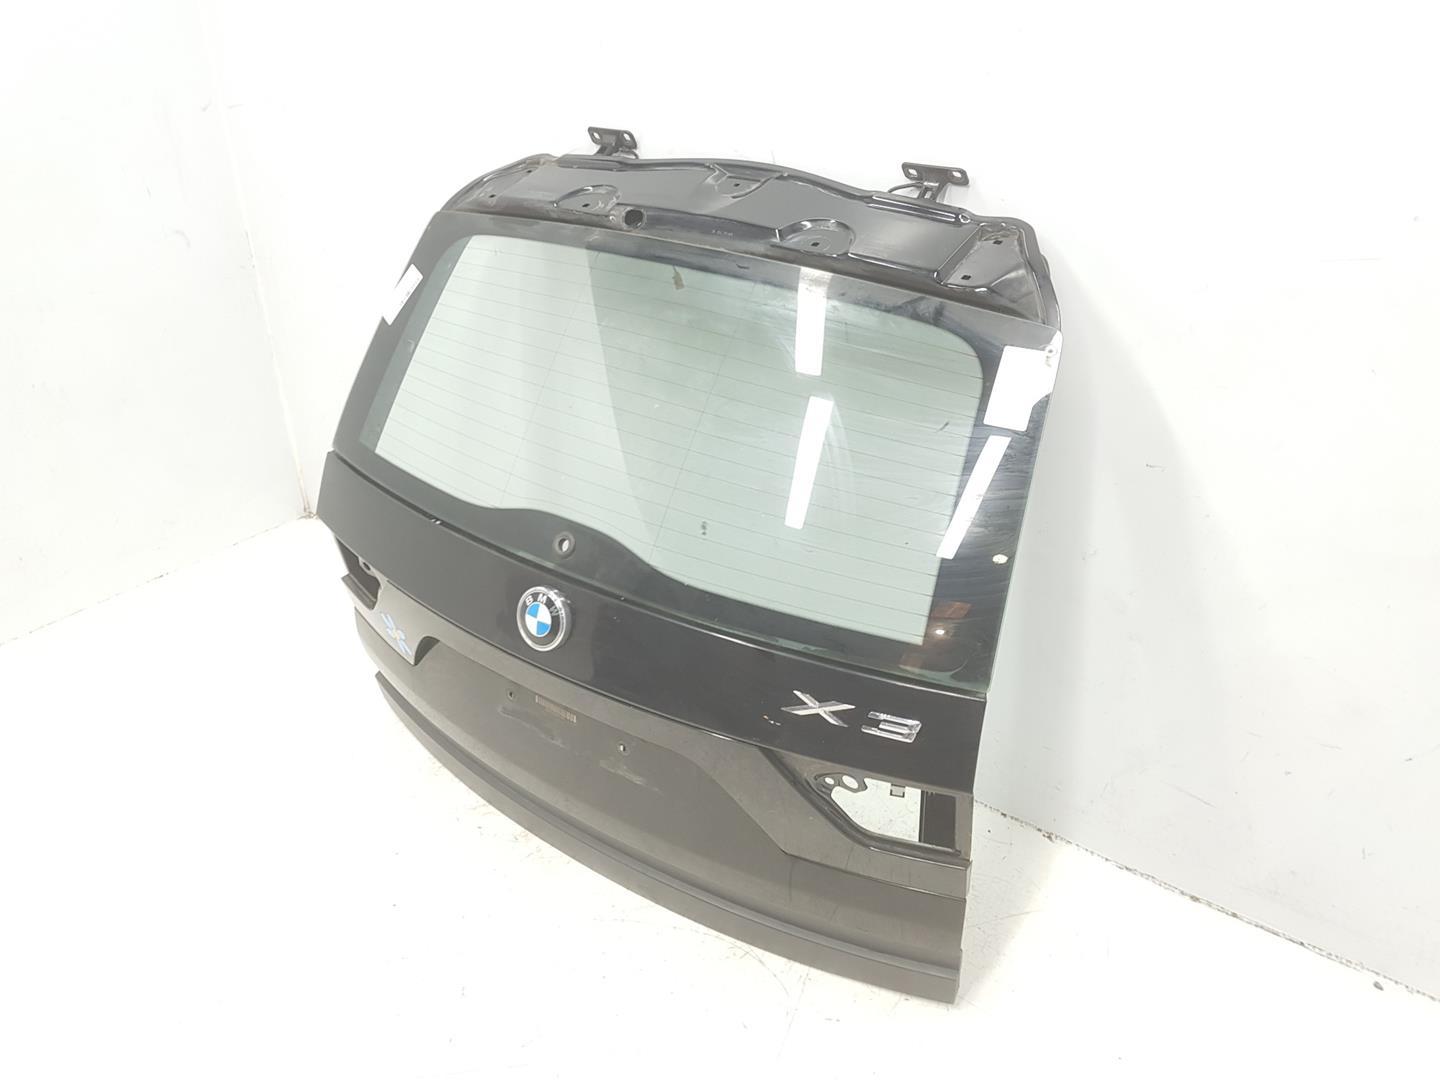 BMW X3 E83 (2003-2010) Bootlid Rear Boot 41003452197, 41003452197, NEGRO668 20994455